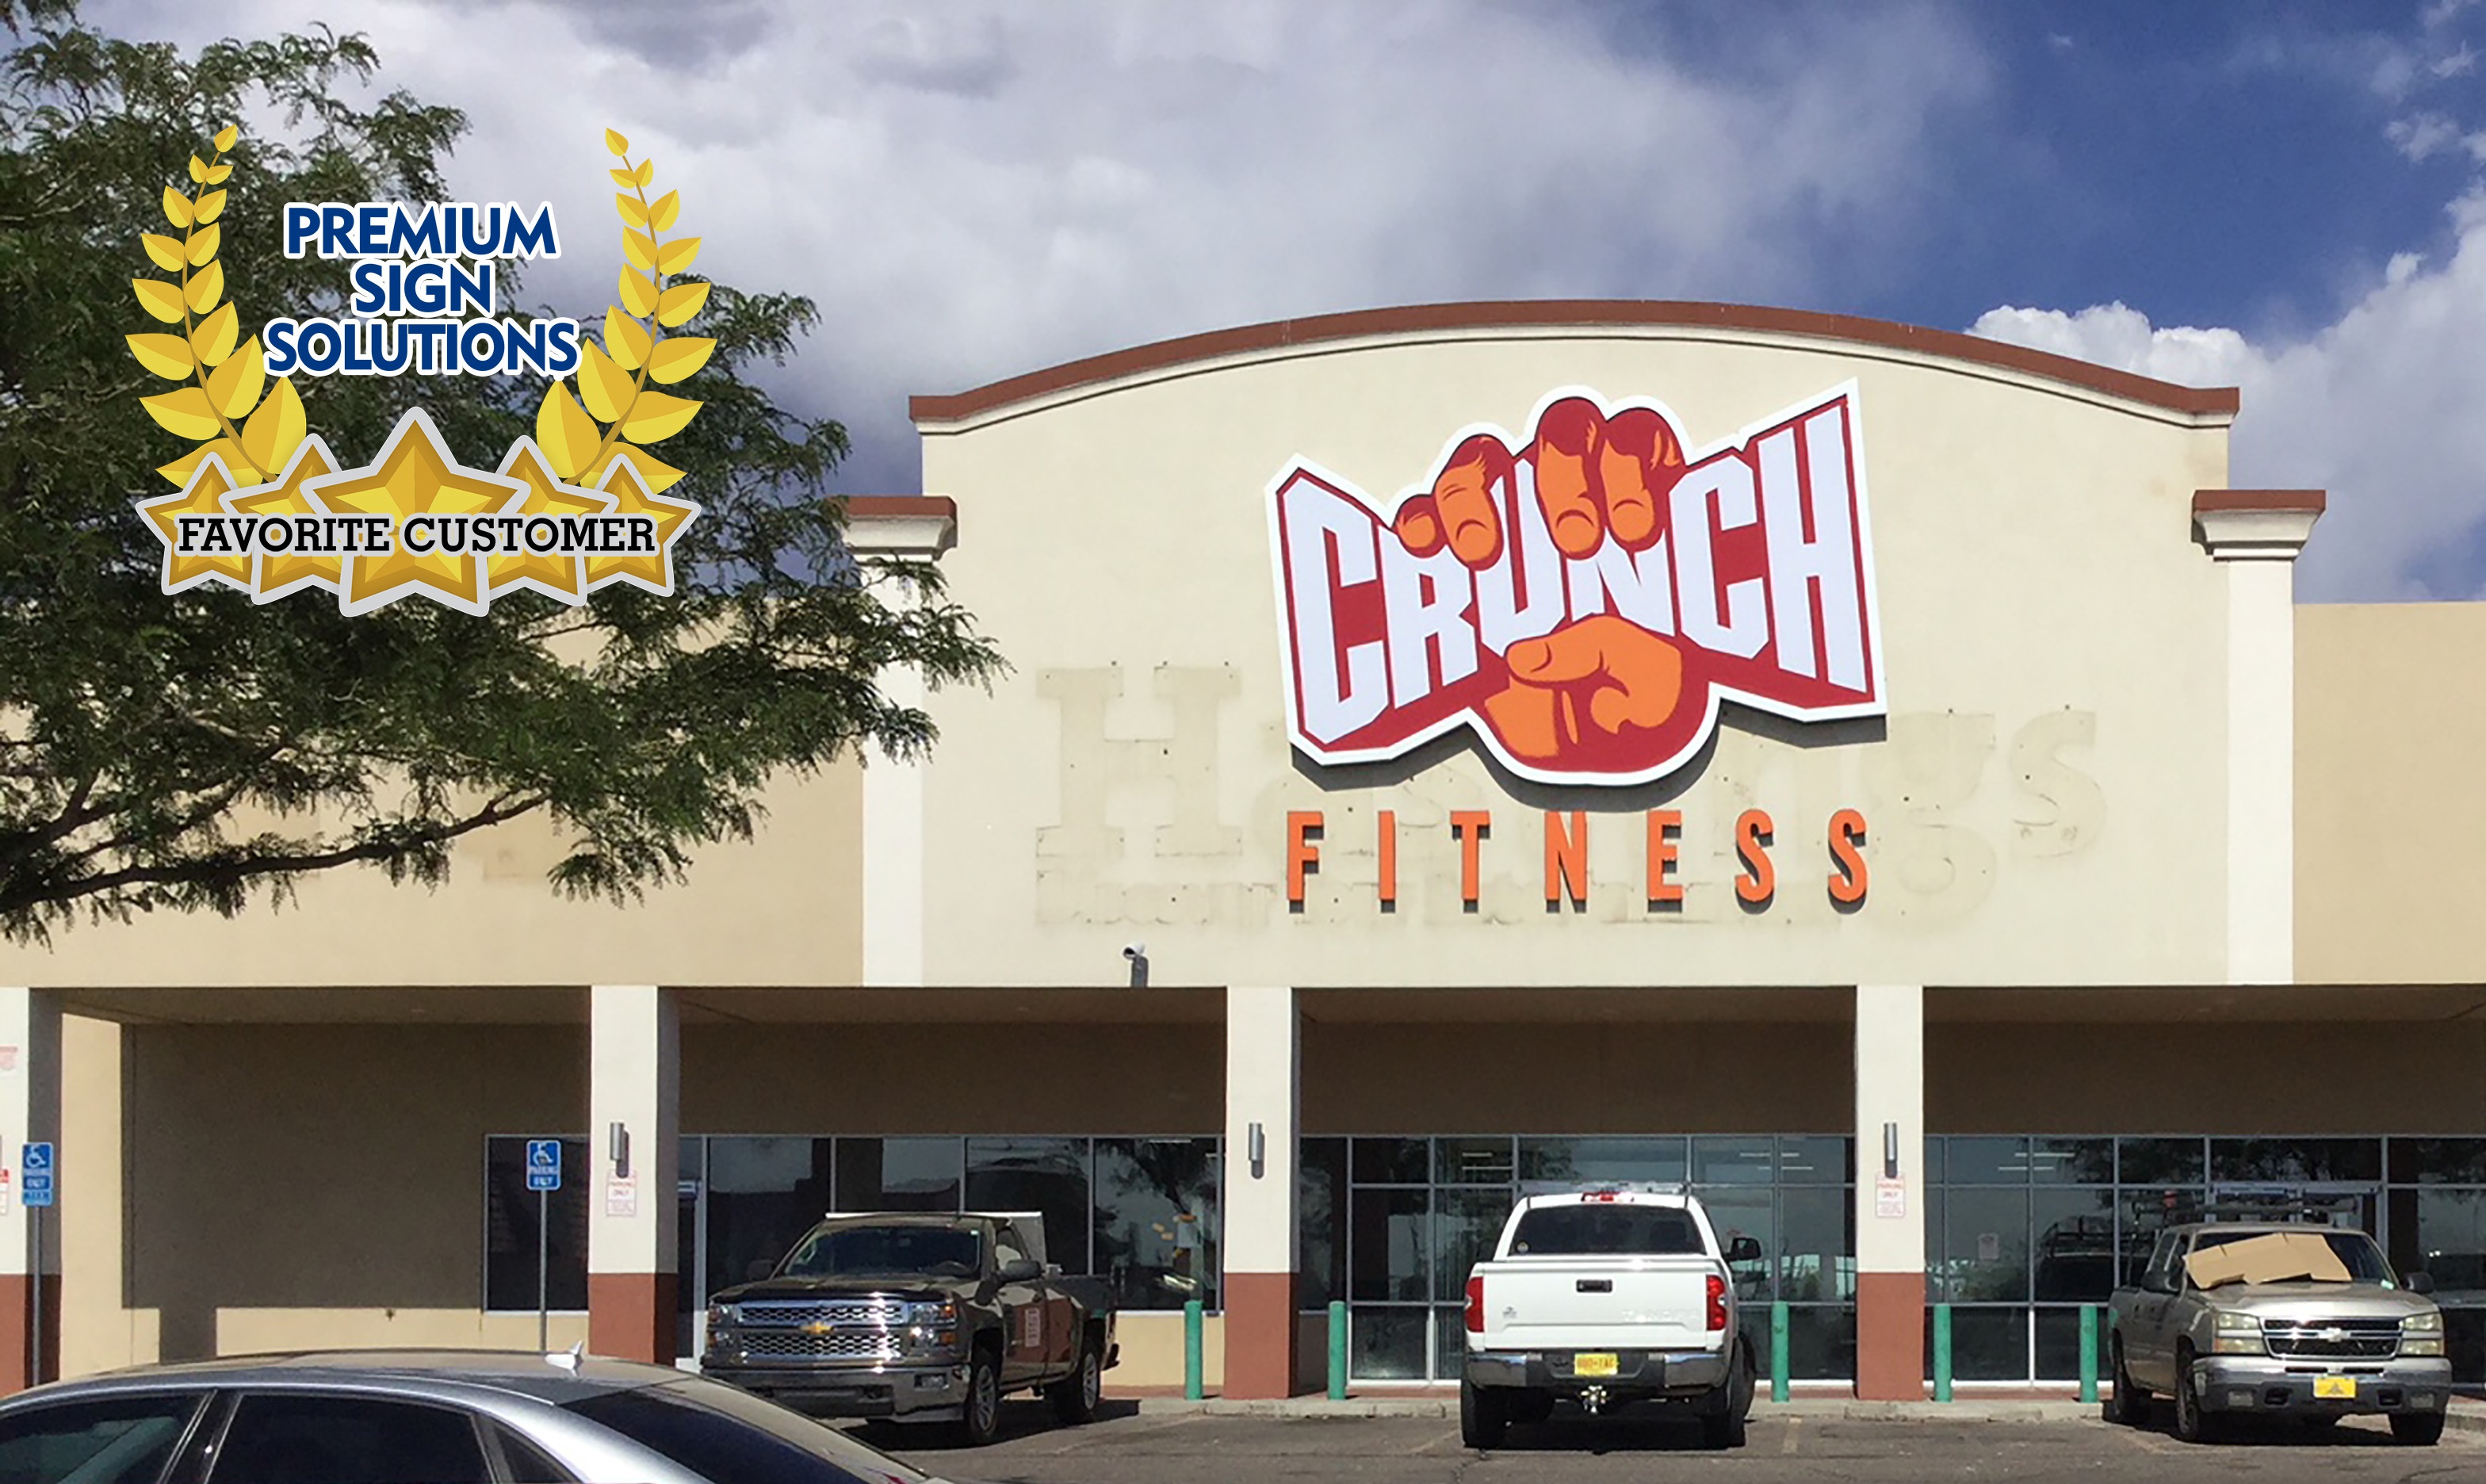 You are currently viewing Honoring Our Favorite Customers: Crunch Fitness in Canoga Park